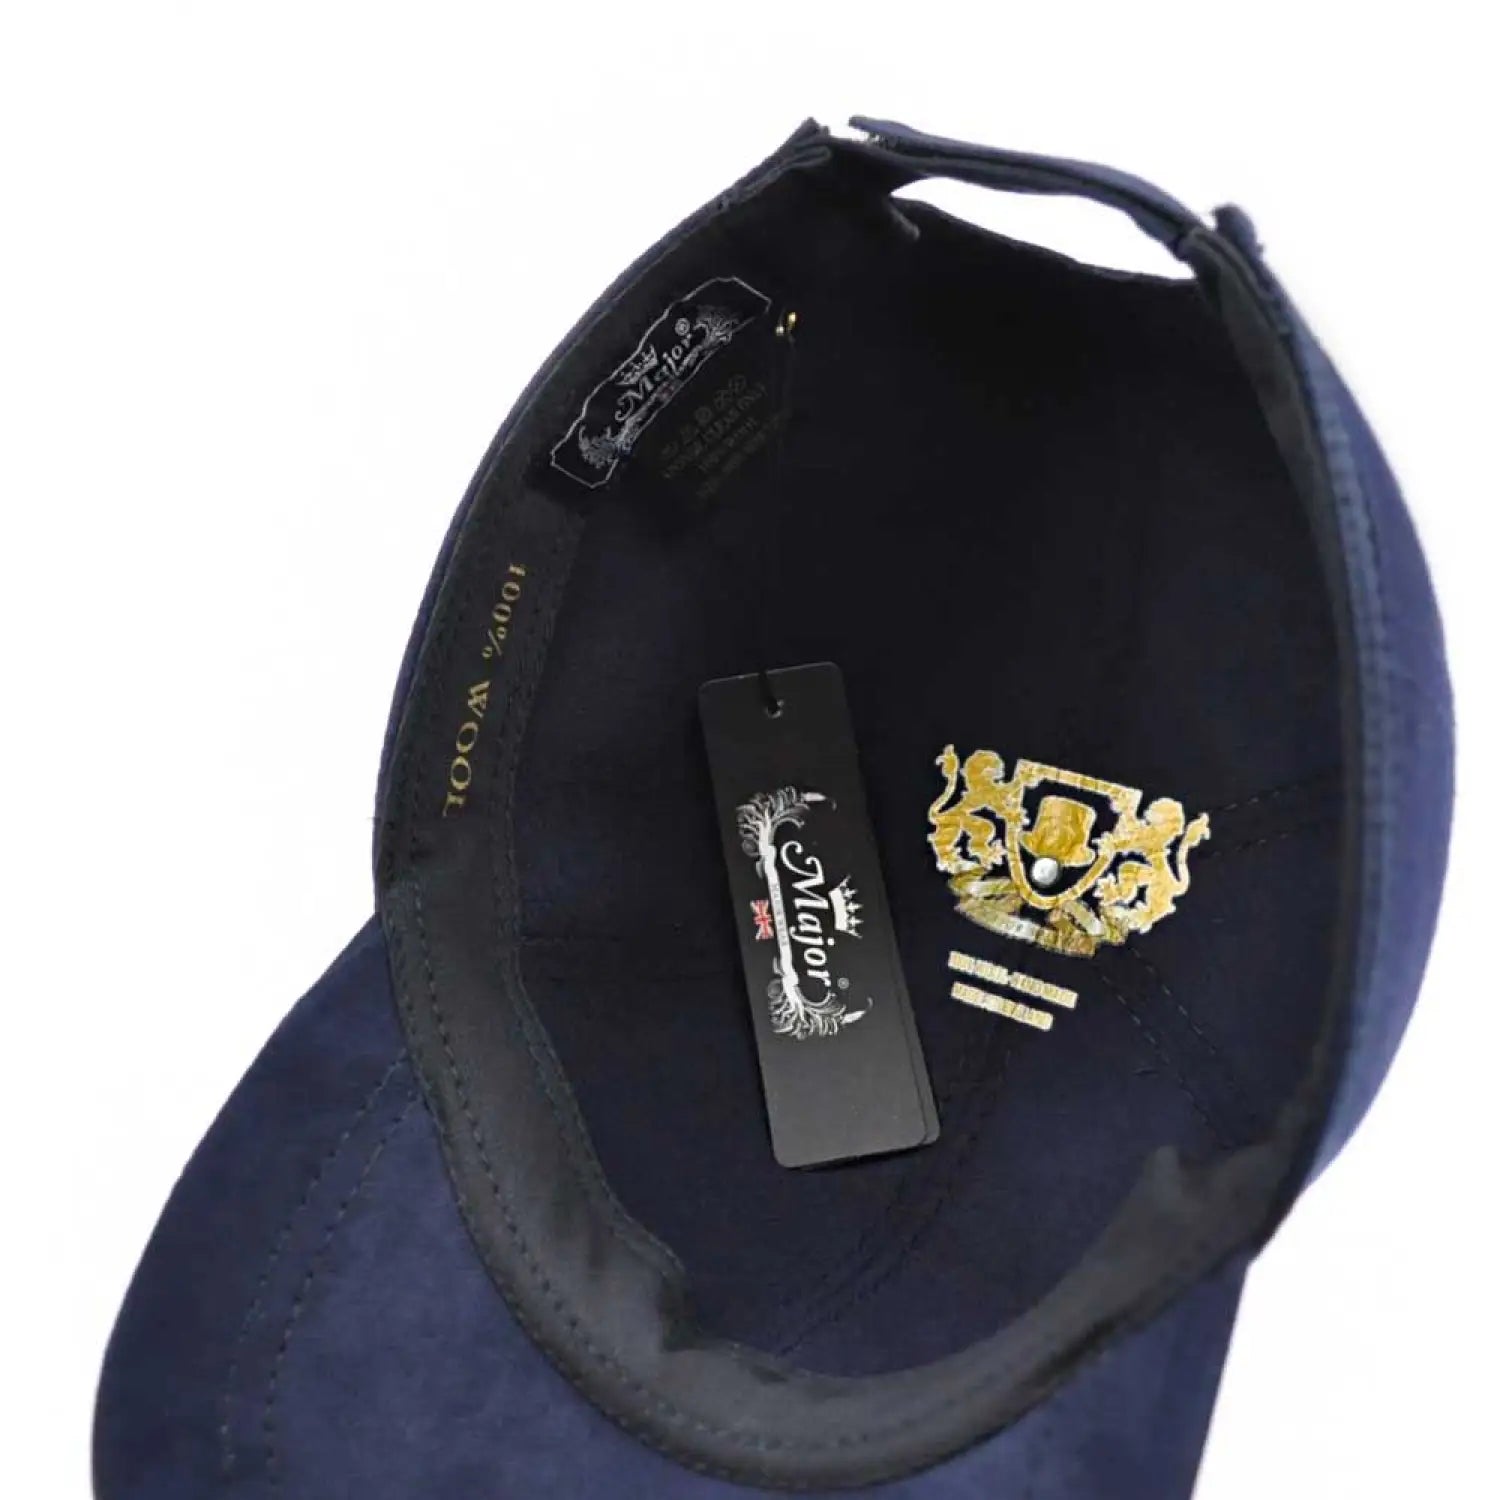 Chic wool felt baseball cap featuring a pair of shoes with sole tag